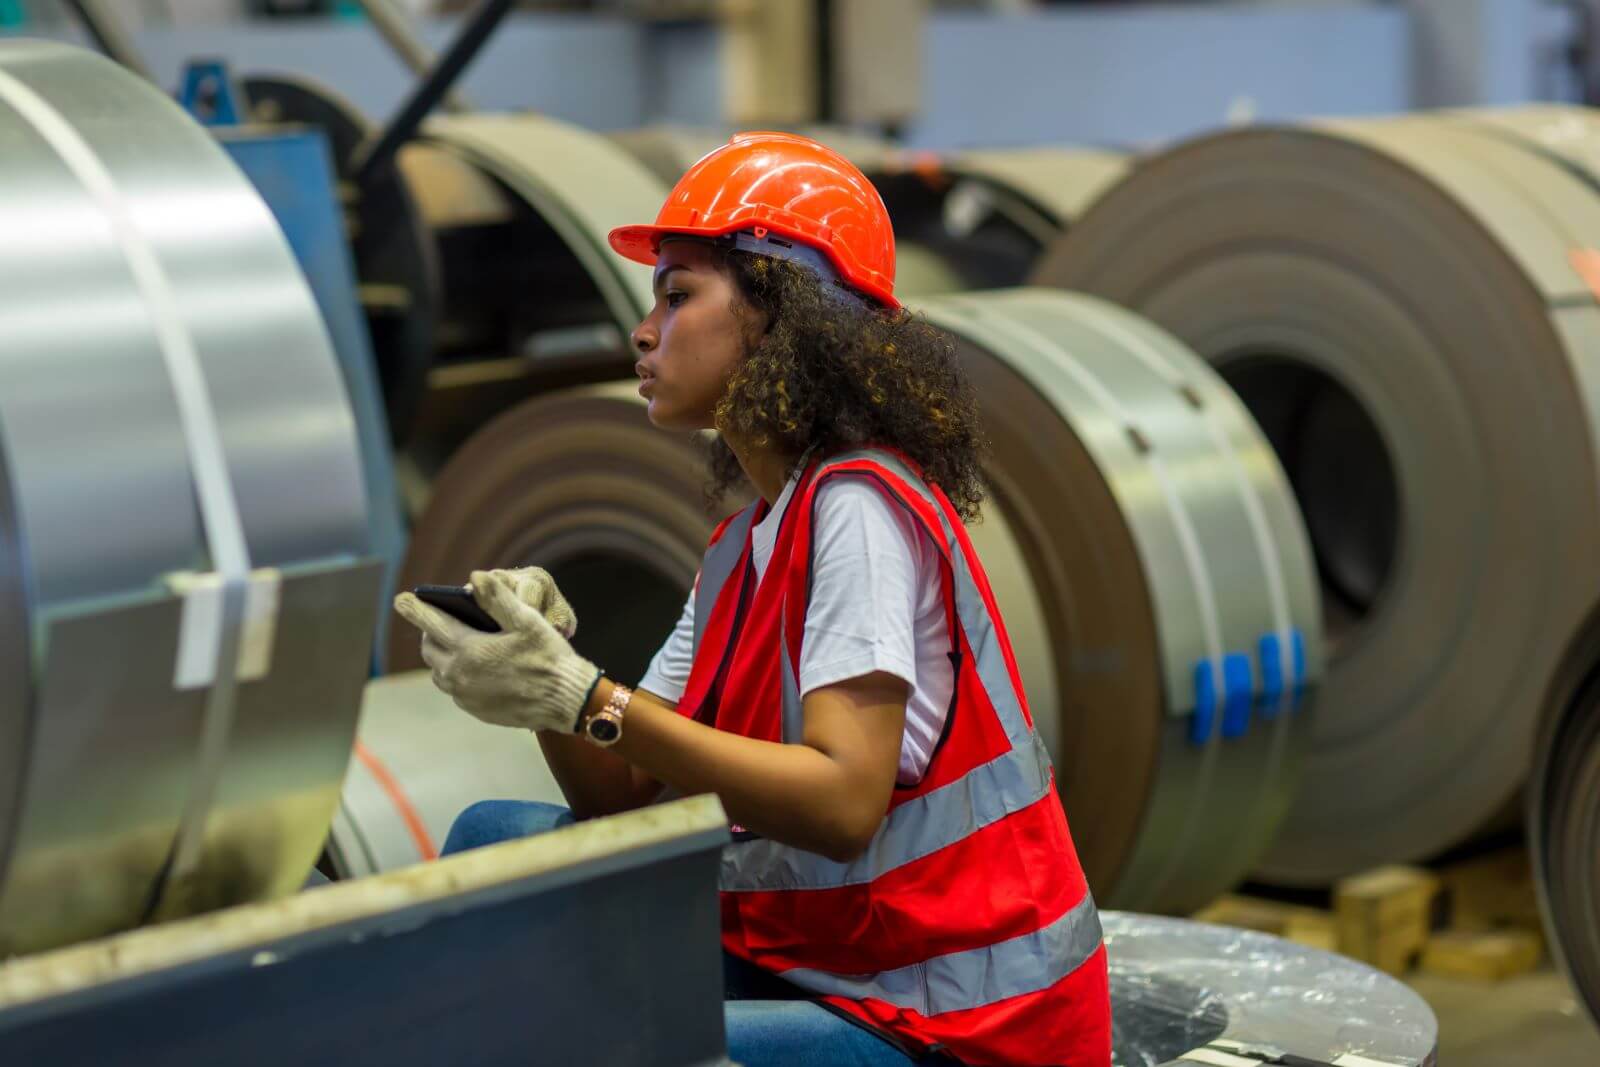 Woman in loud working environment wearing safety gear